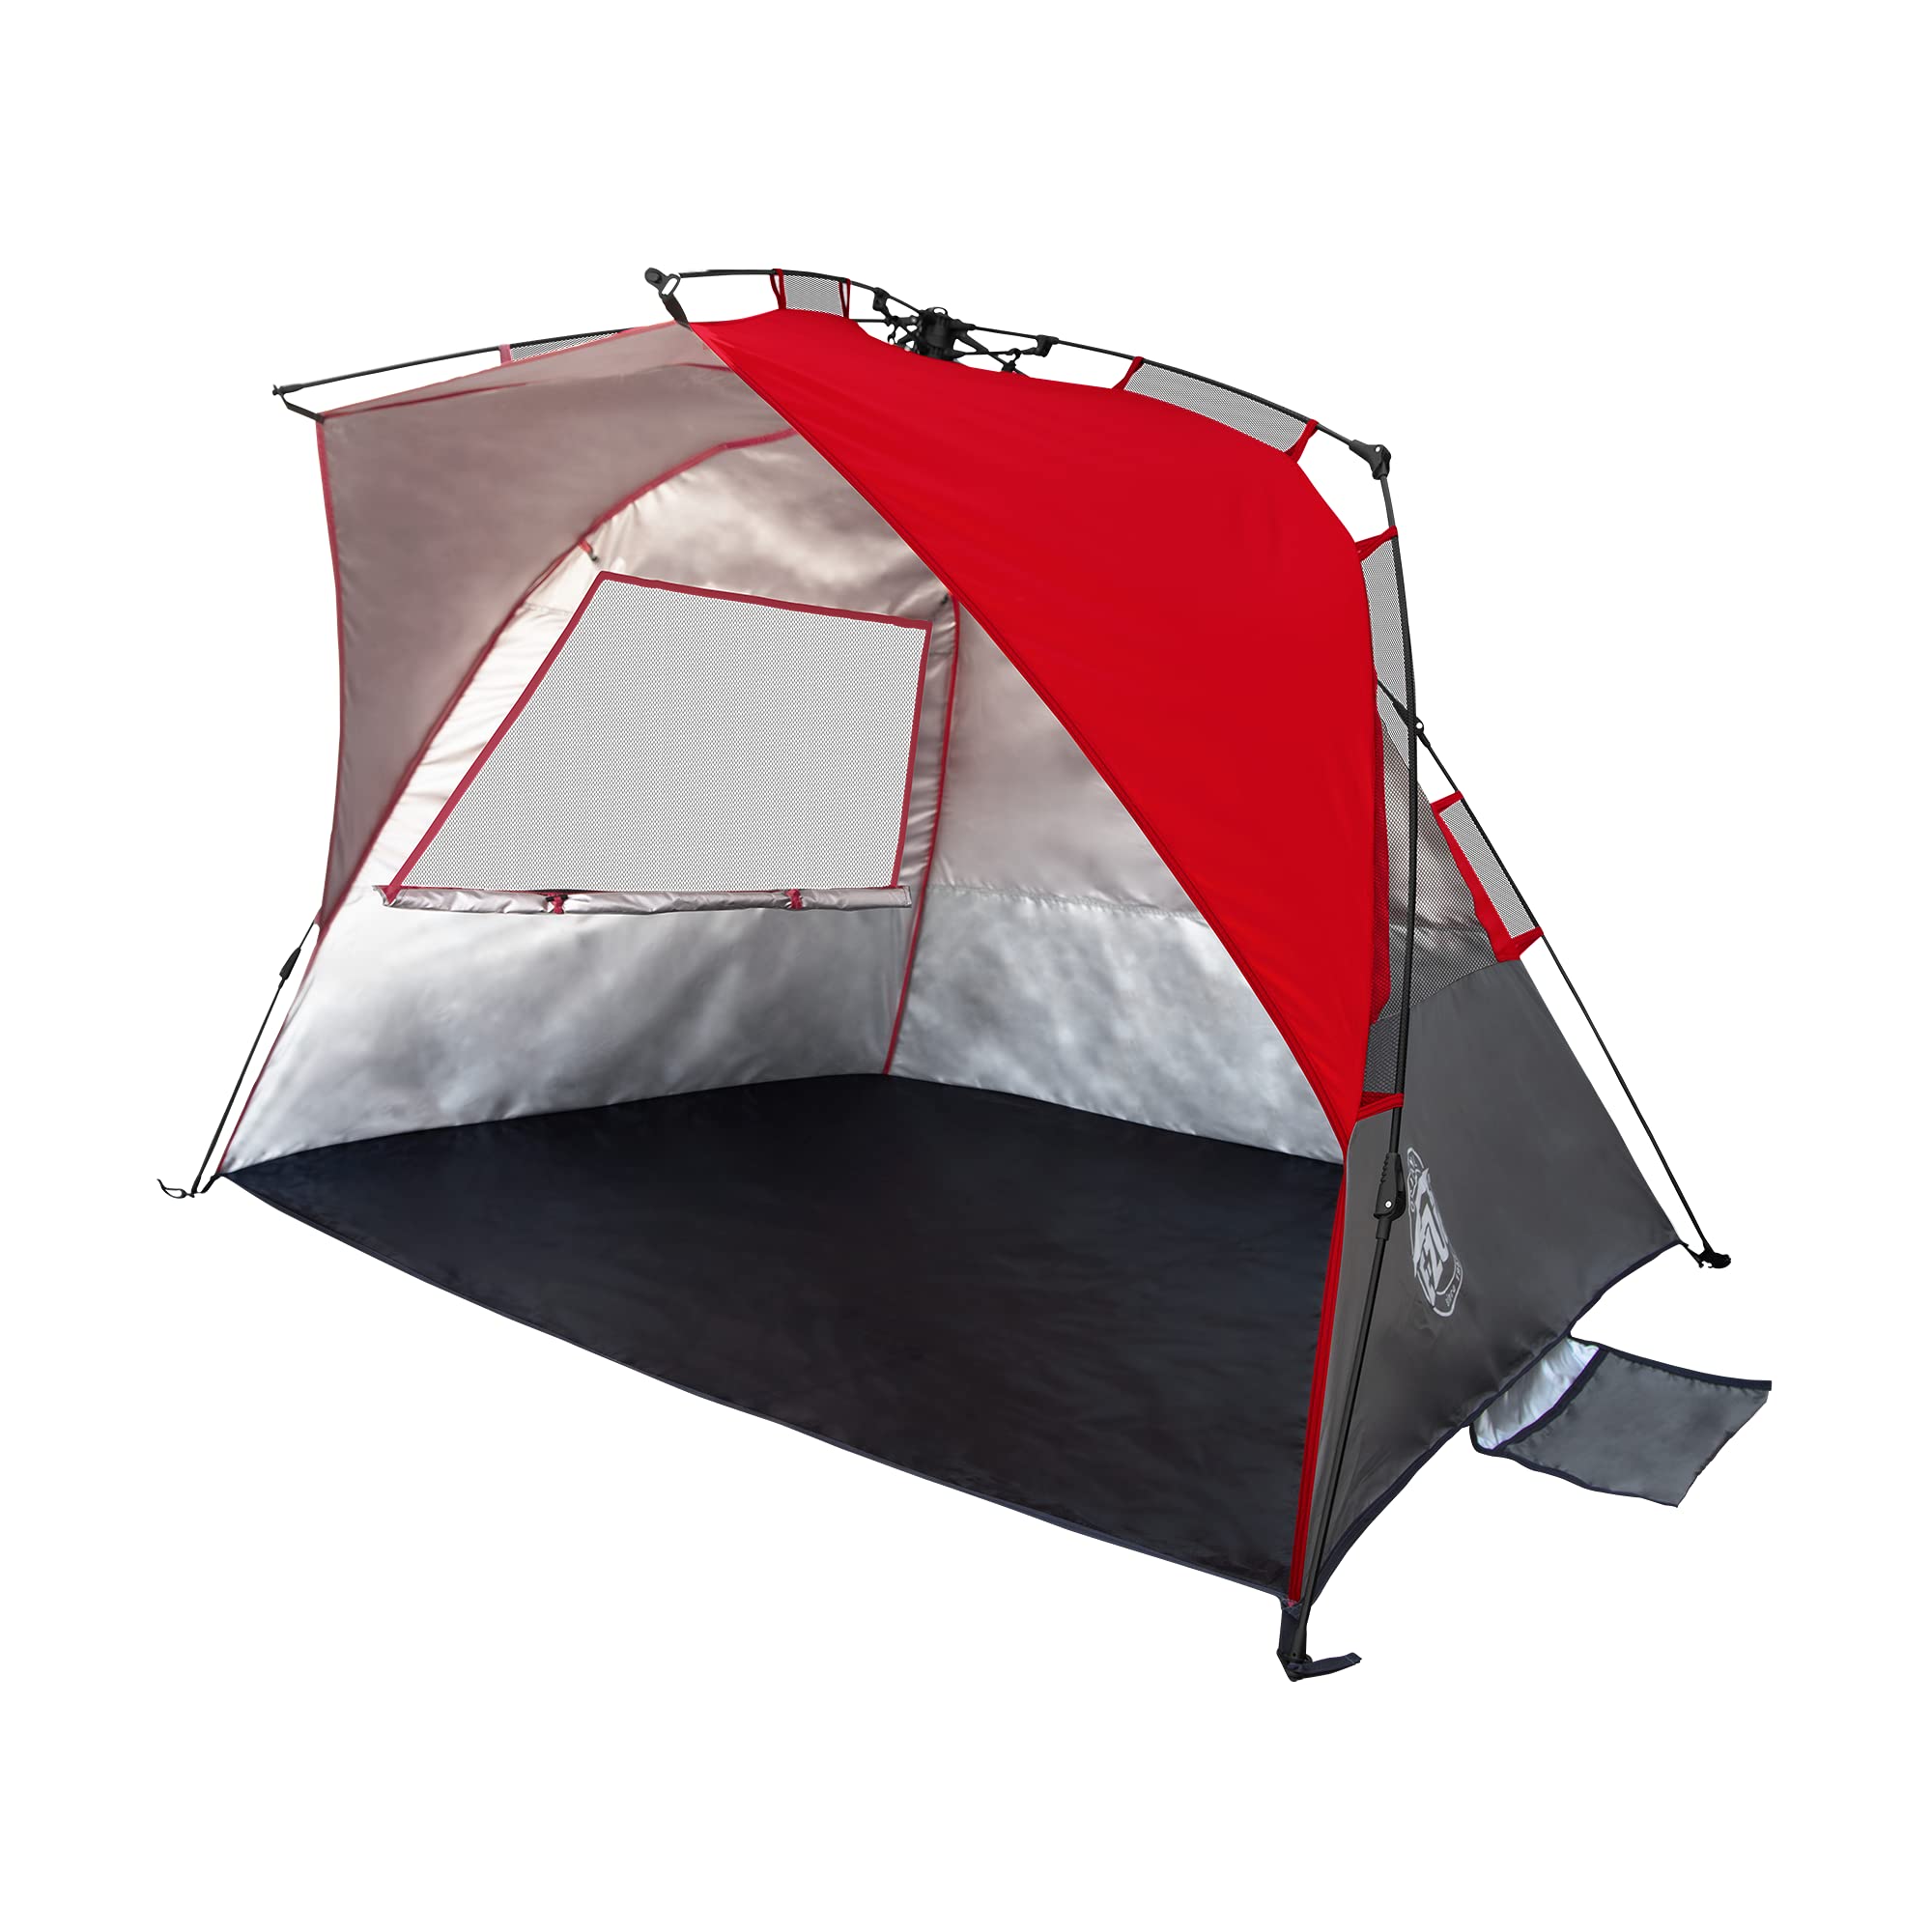 WEDGE BEACH & SPORT TENT 8FT RED CARRY BAG